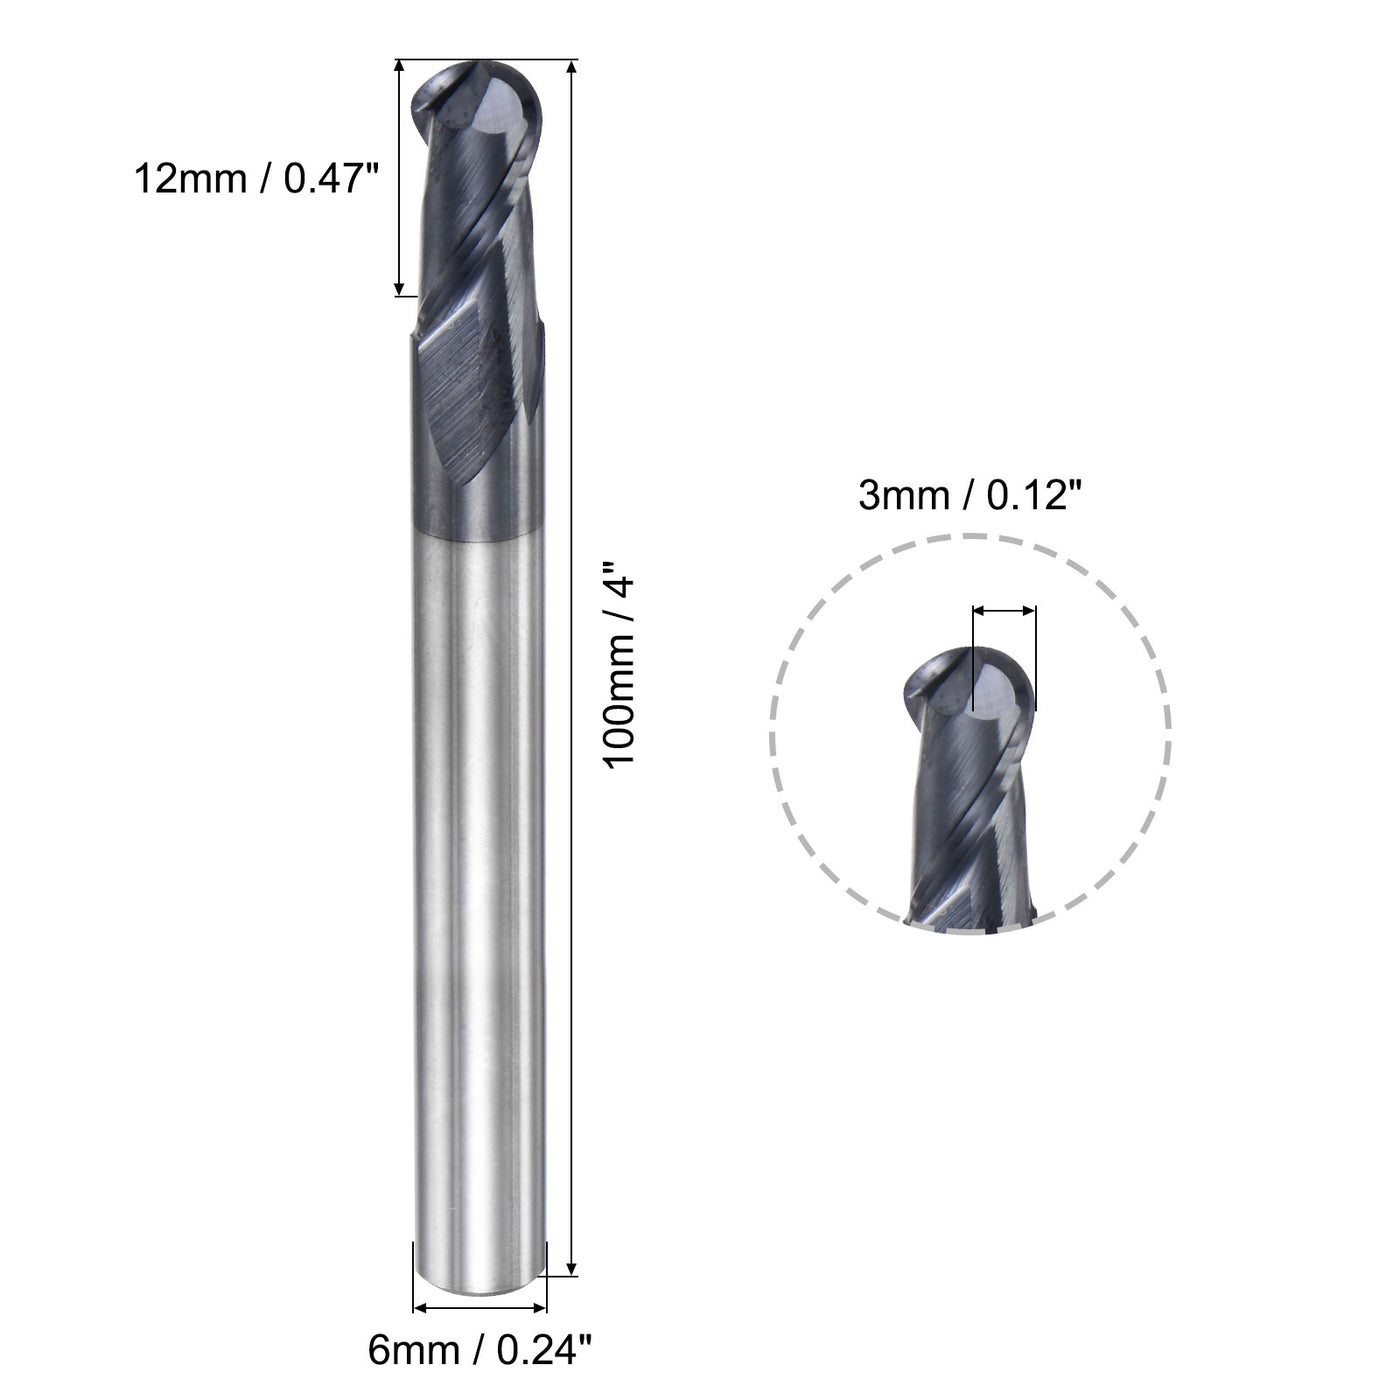 uxcell Uxcell 3mm Radius 100mm Long HRC45 Carbide AlTiSin Coated 2 Flute Ball Nose End Mill